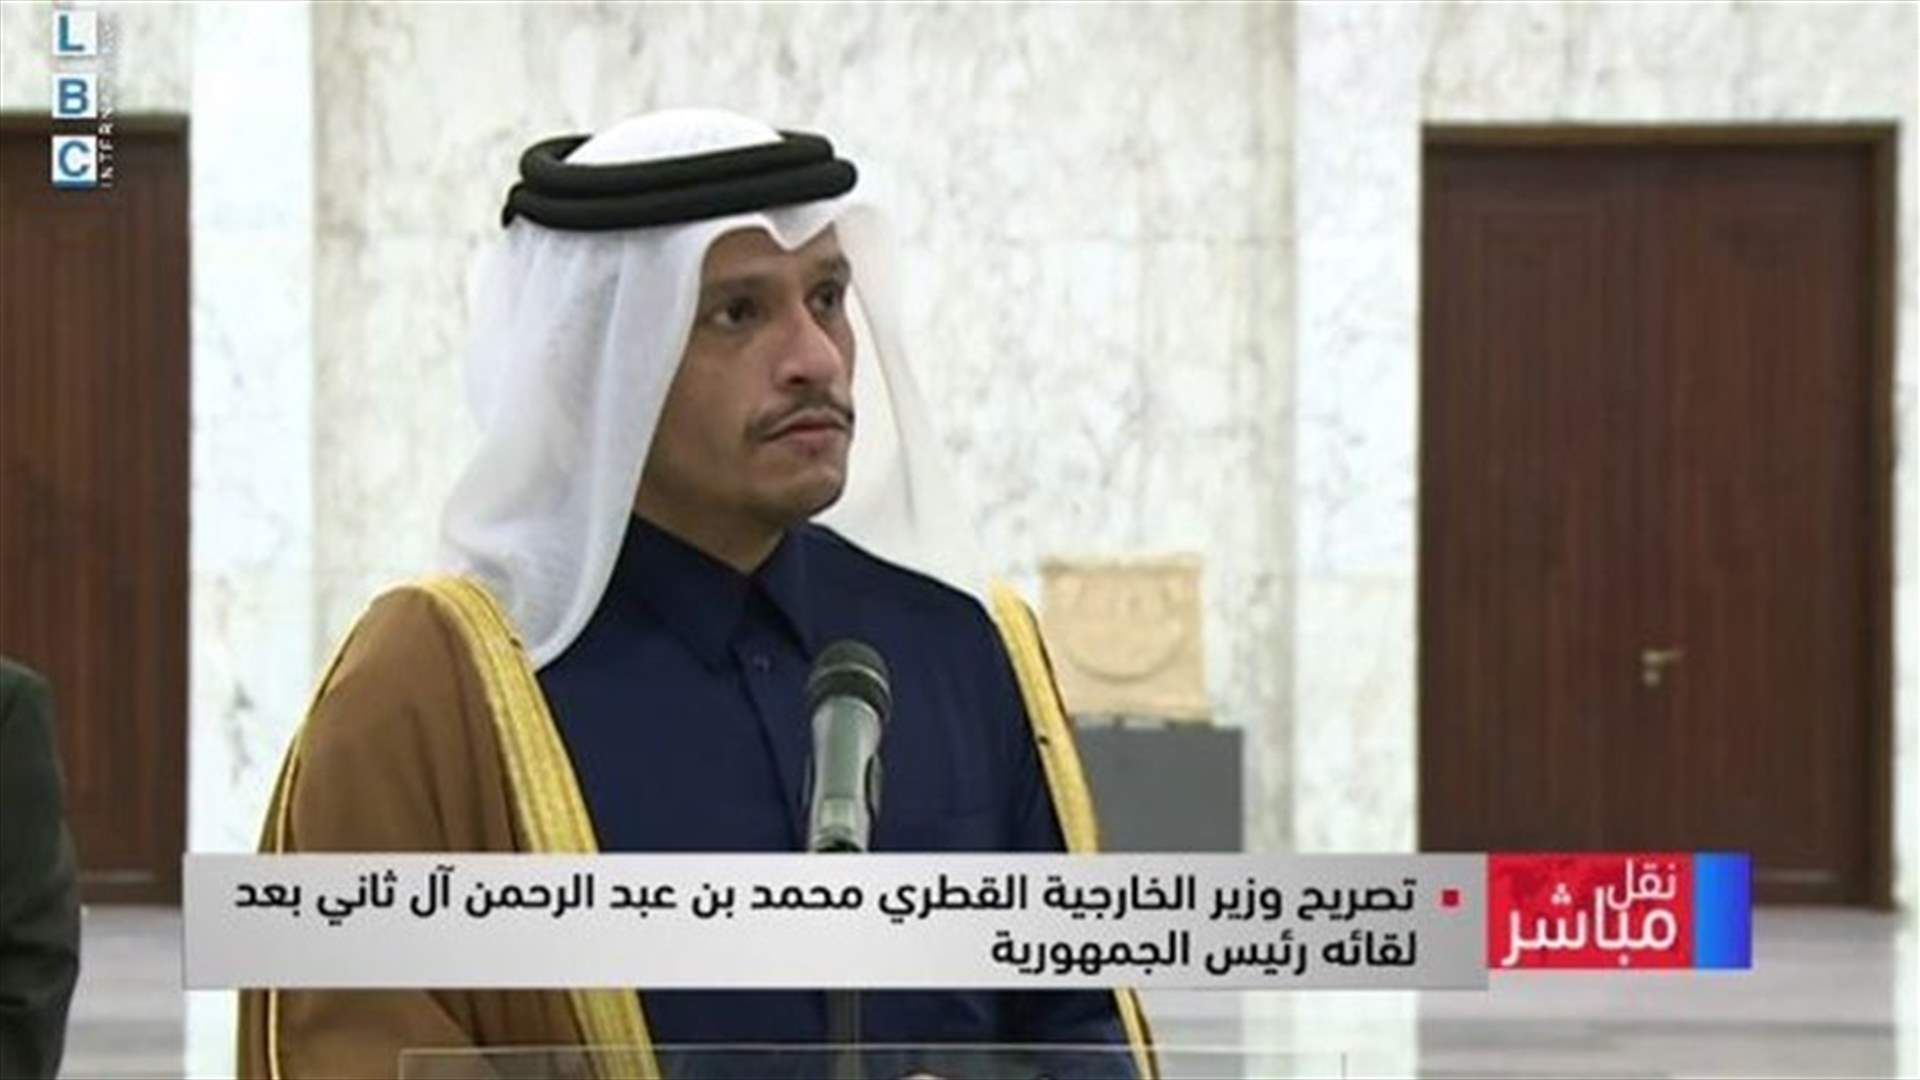 Qatari Foreign Minister from Baadba: We support any path to form a government